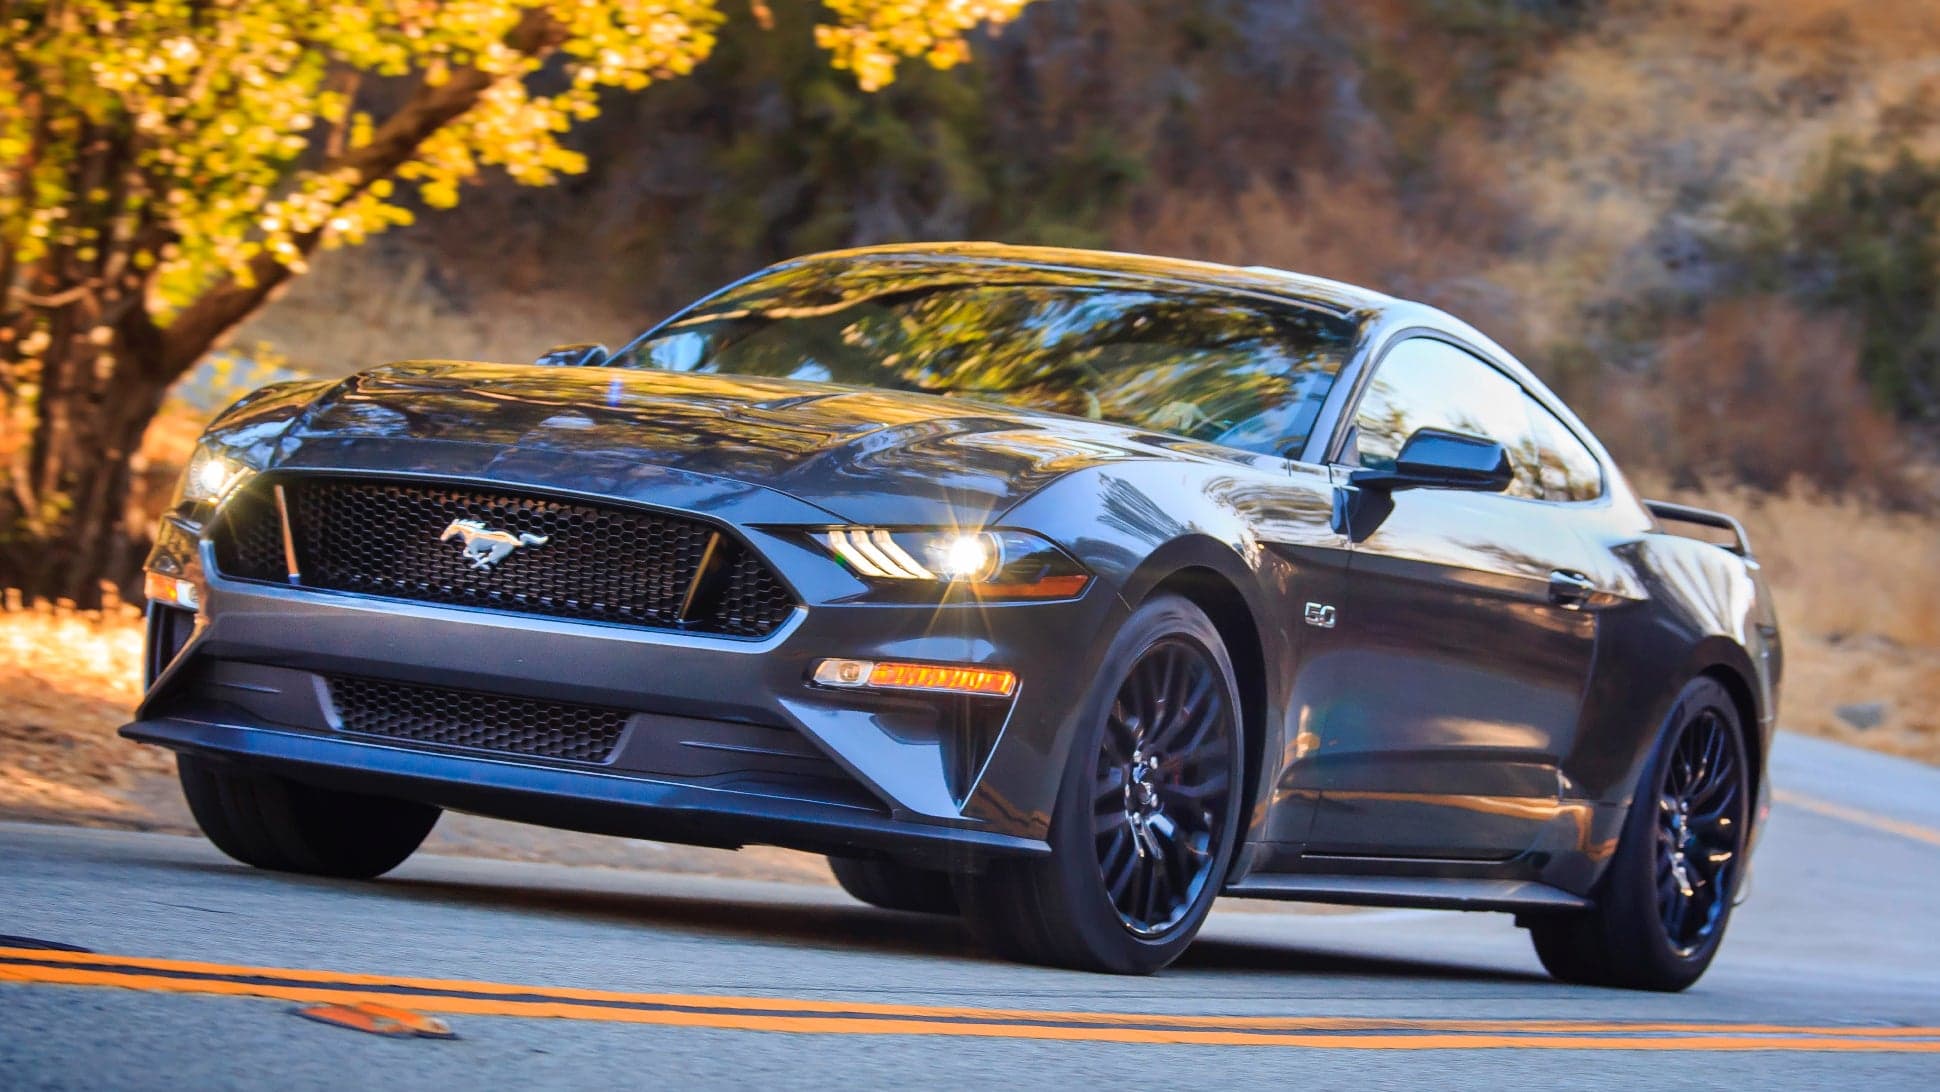 The Ford Mustang Could Score a New, More Powerful Turbo Engine in 2020